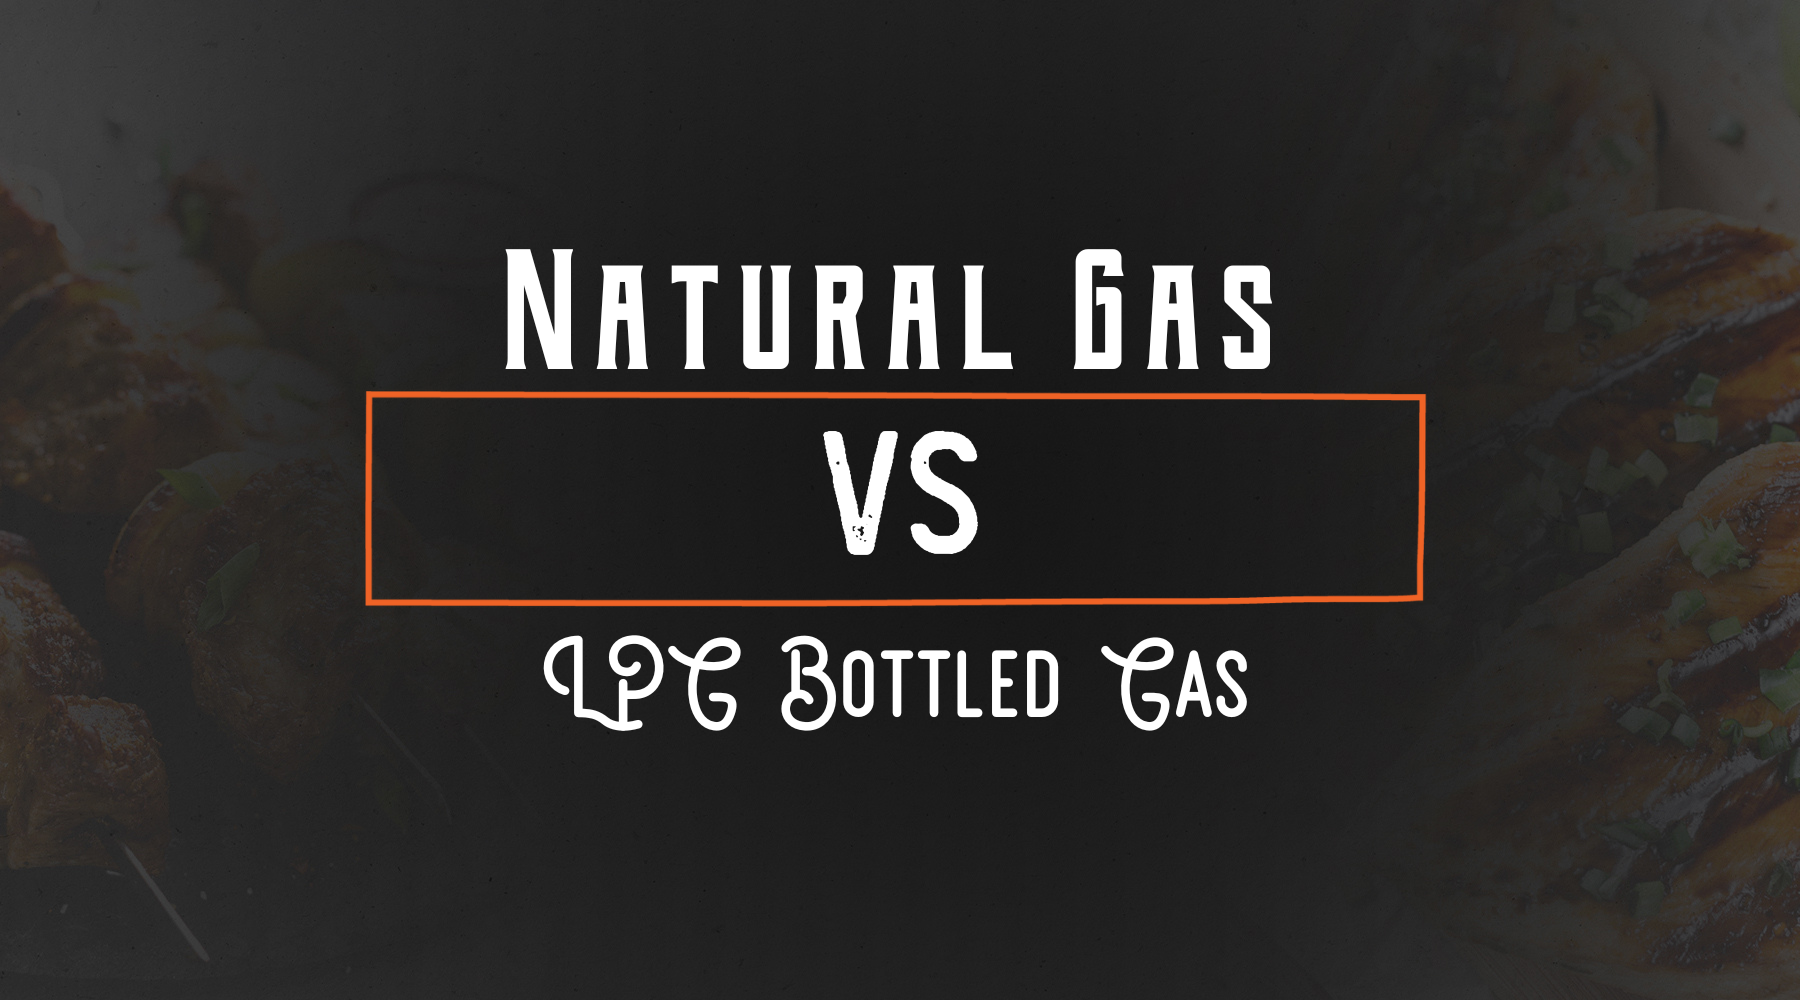 Natural Gas vs LPG Gas: Which is Best for Your Outdoor Entertaining Area?